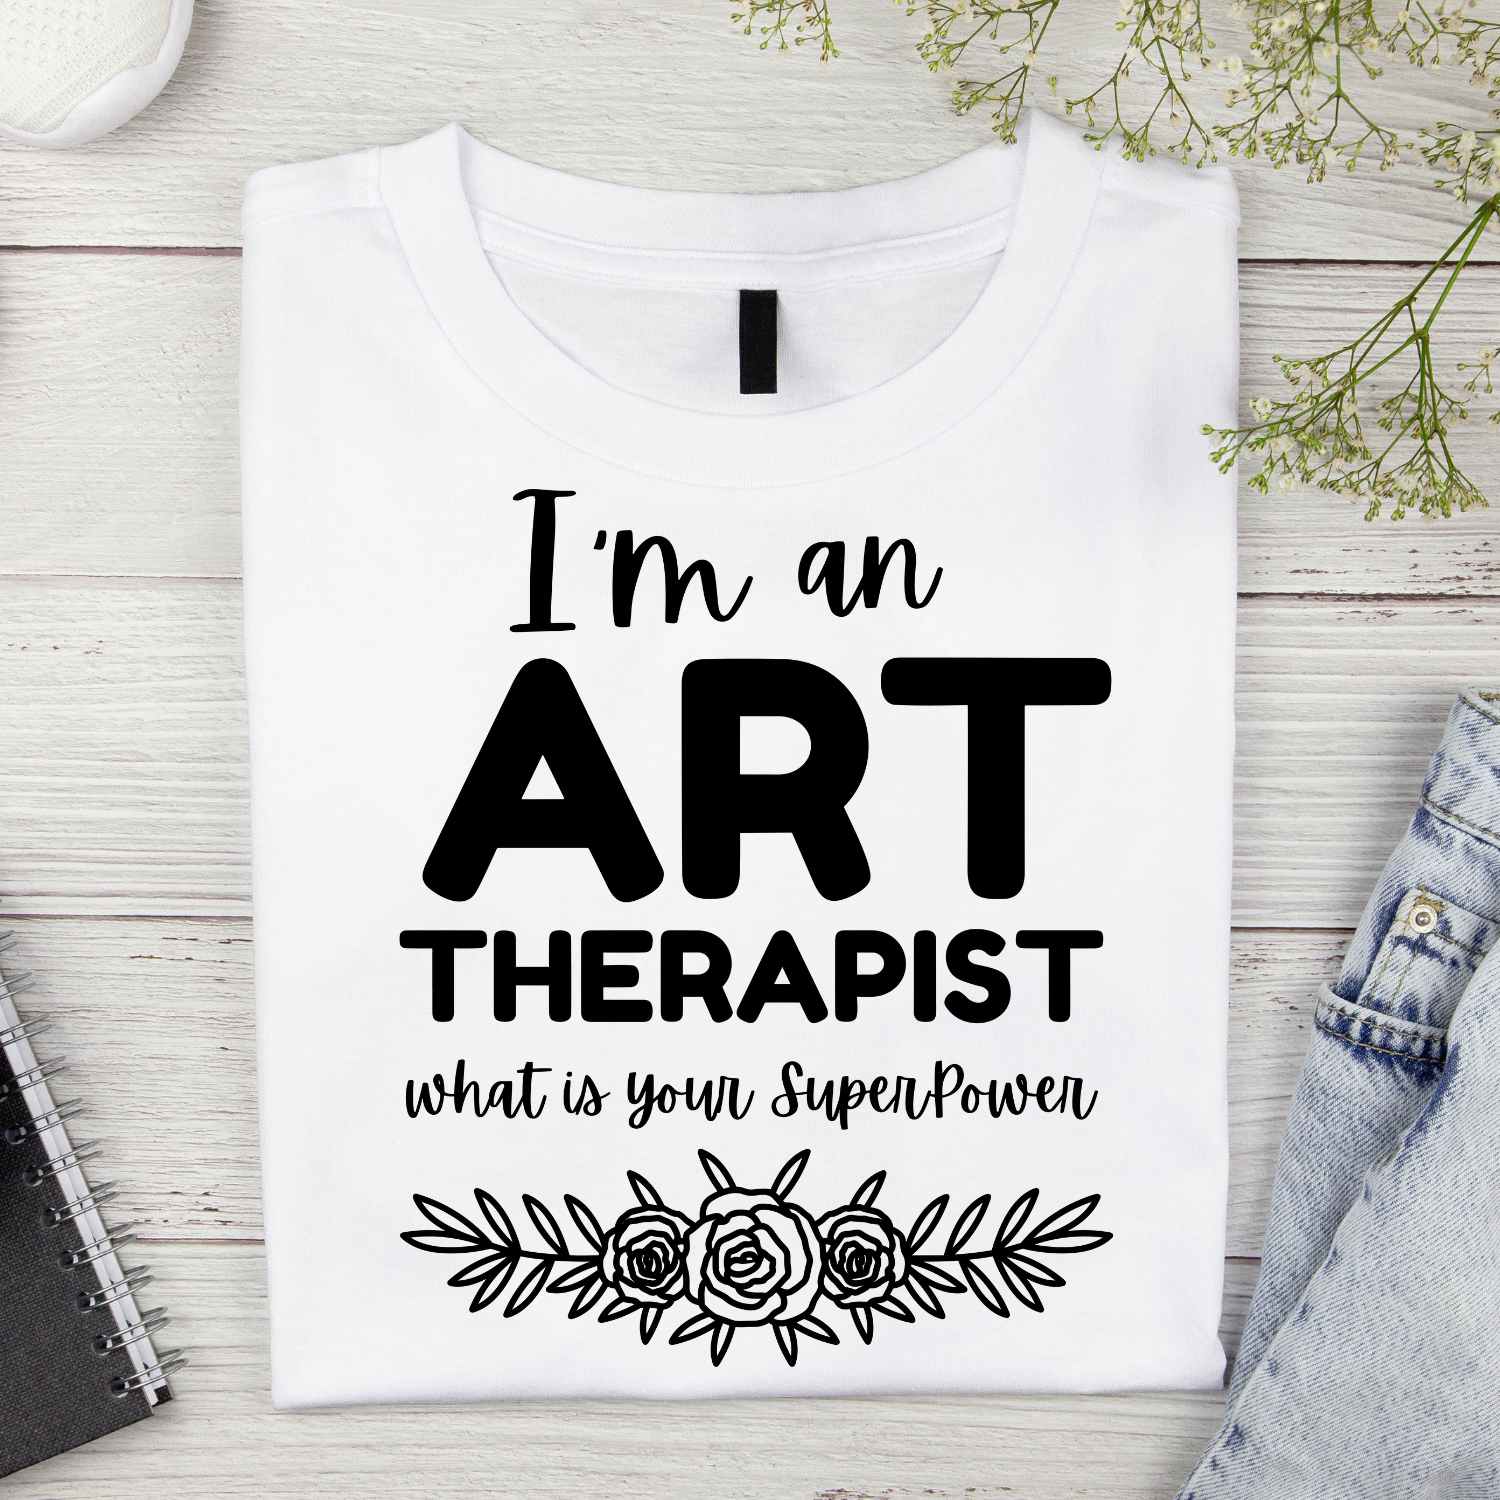 I am an Art Therapist what is your Superpower T-shirt Design